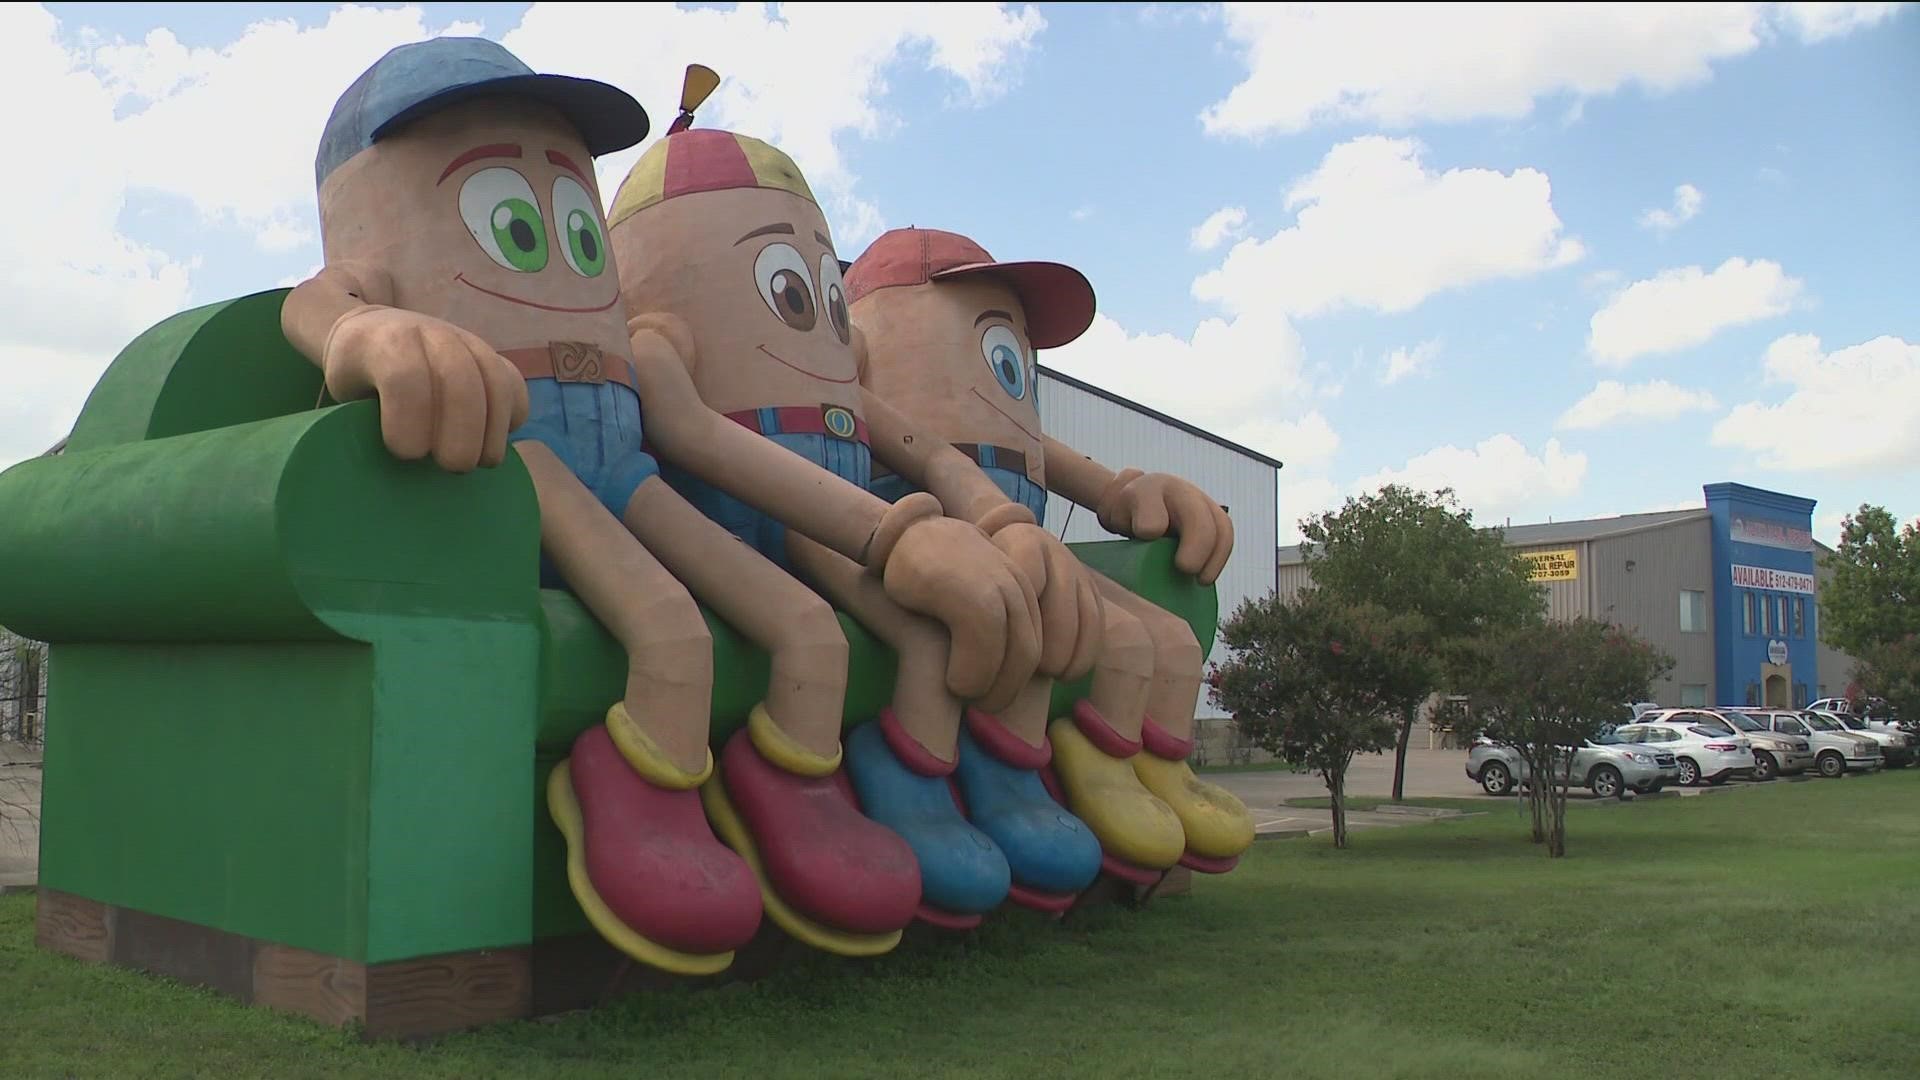 The spuds have found a new home at Circuit of the Americas.